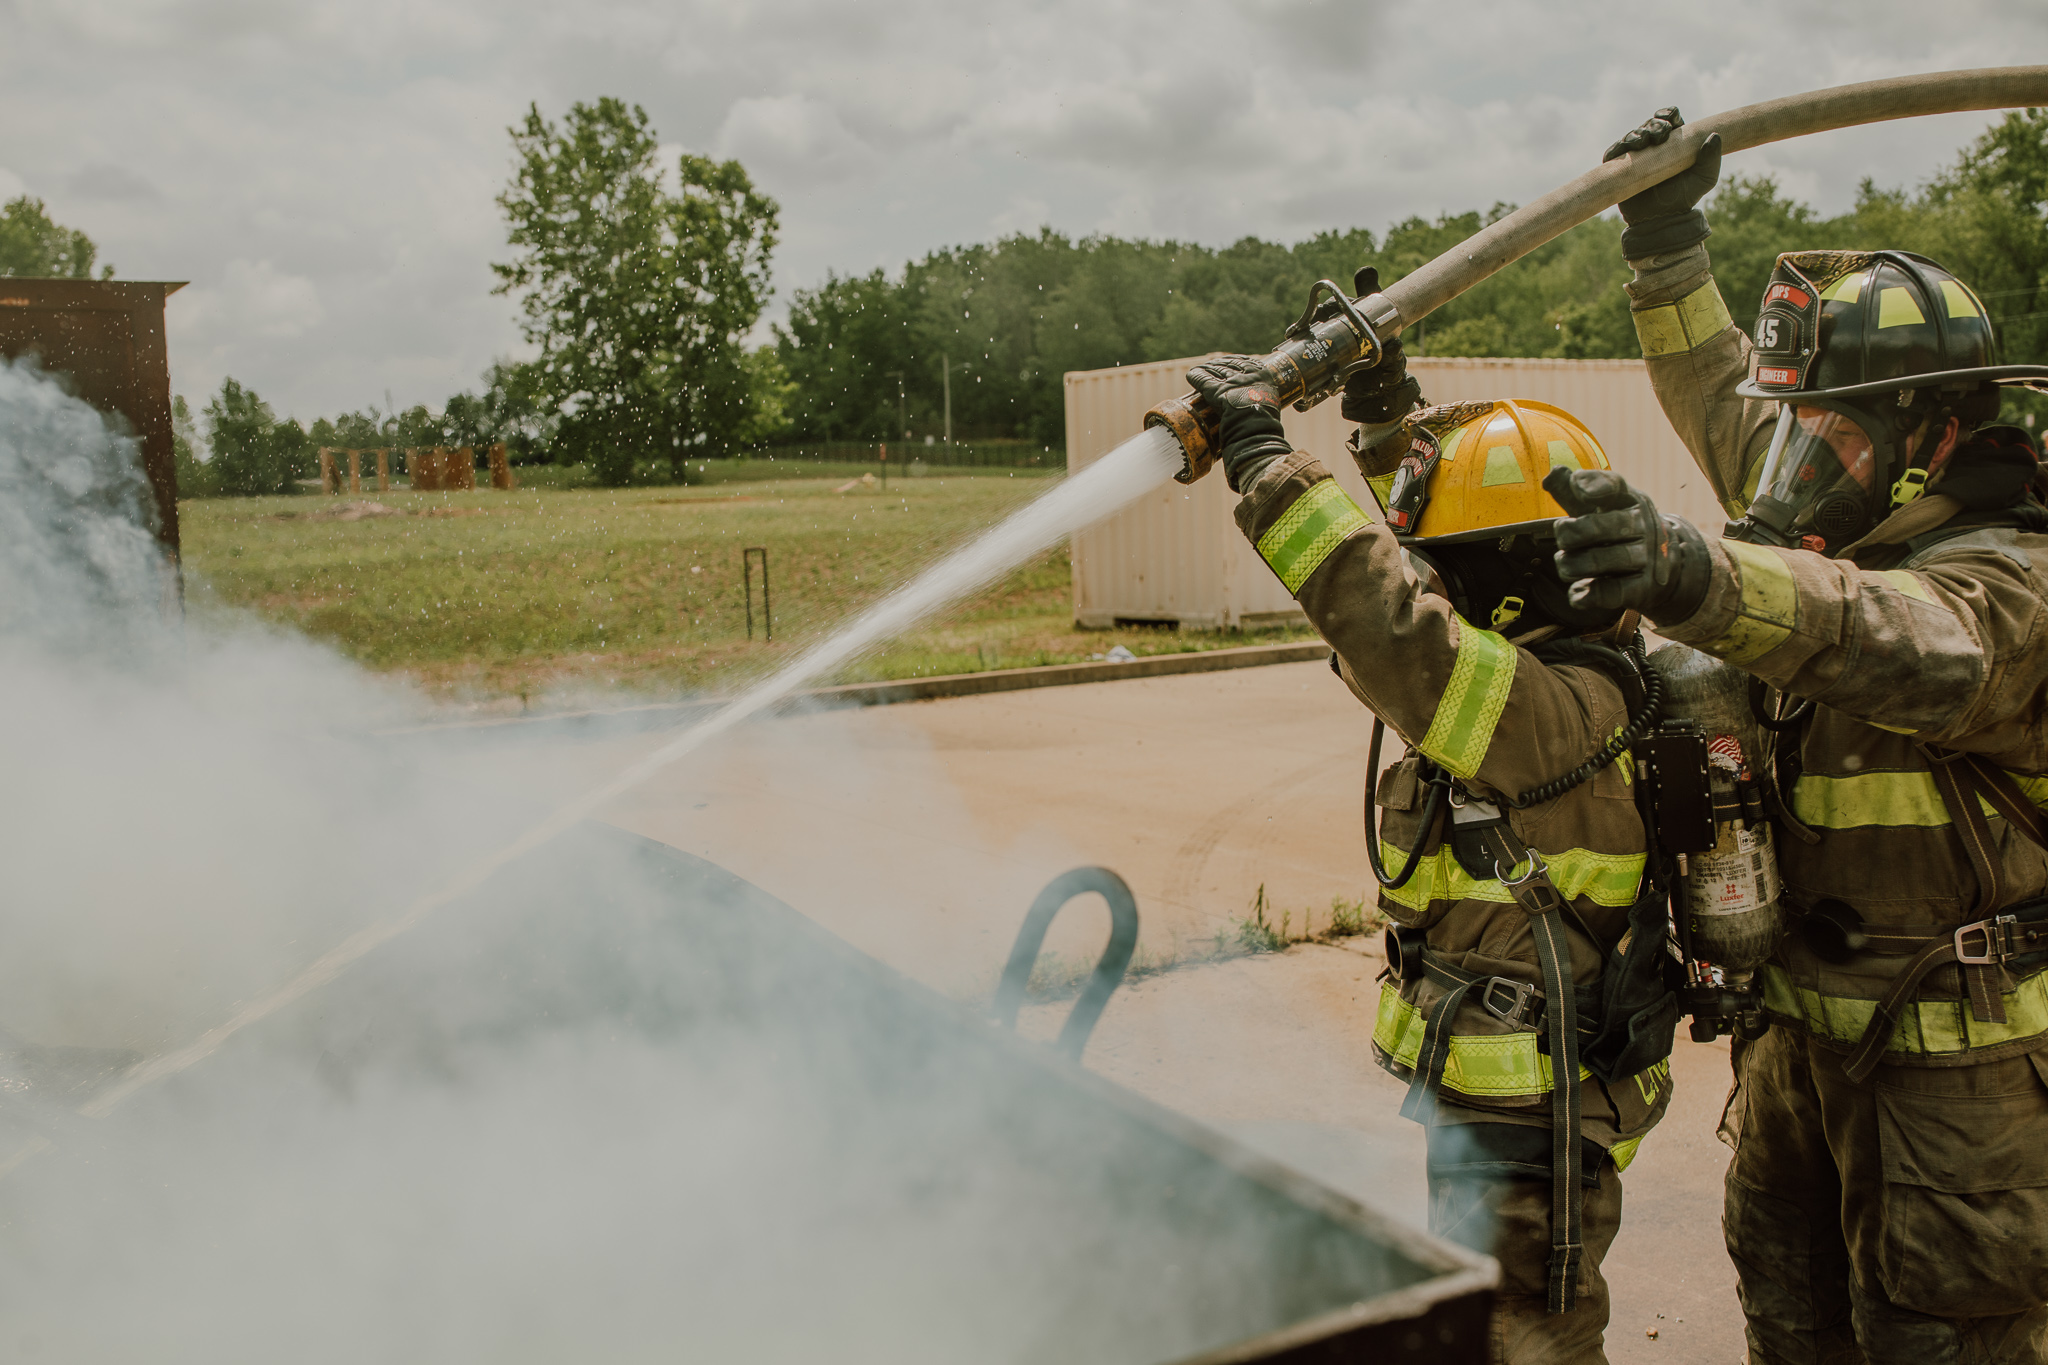 A phot of firefighters extinguishing a fire during a training exercise